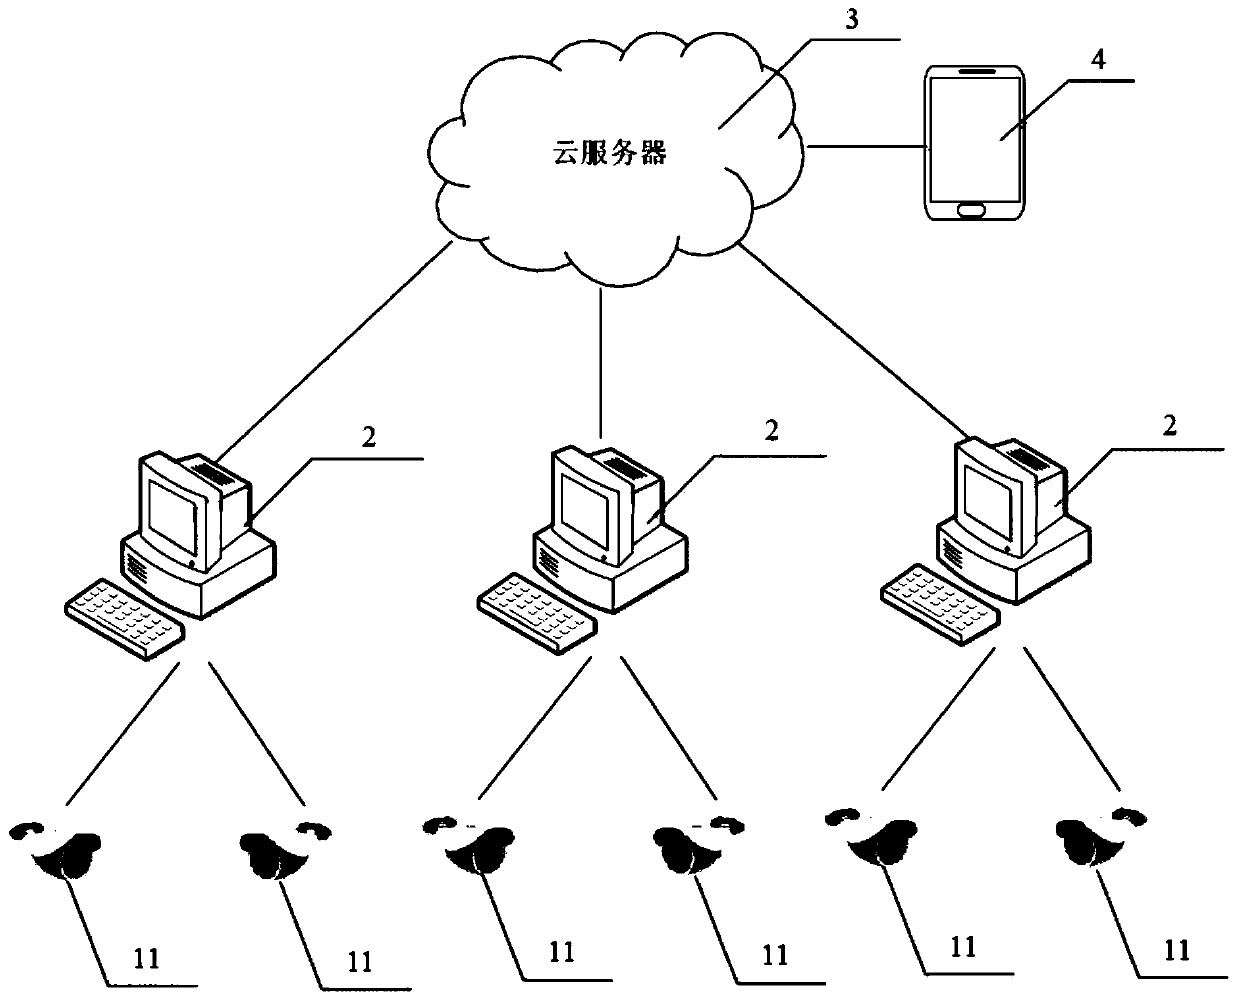 Intelligent monitoring system and method for rodent infestation based on cloud server